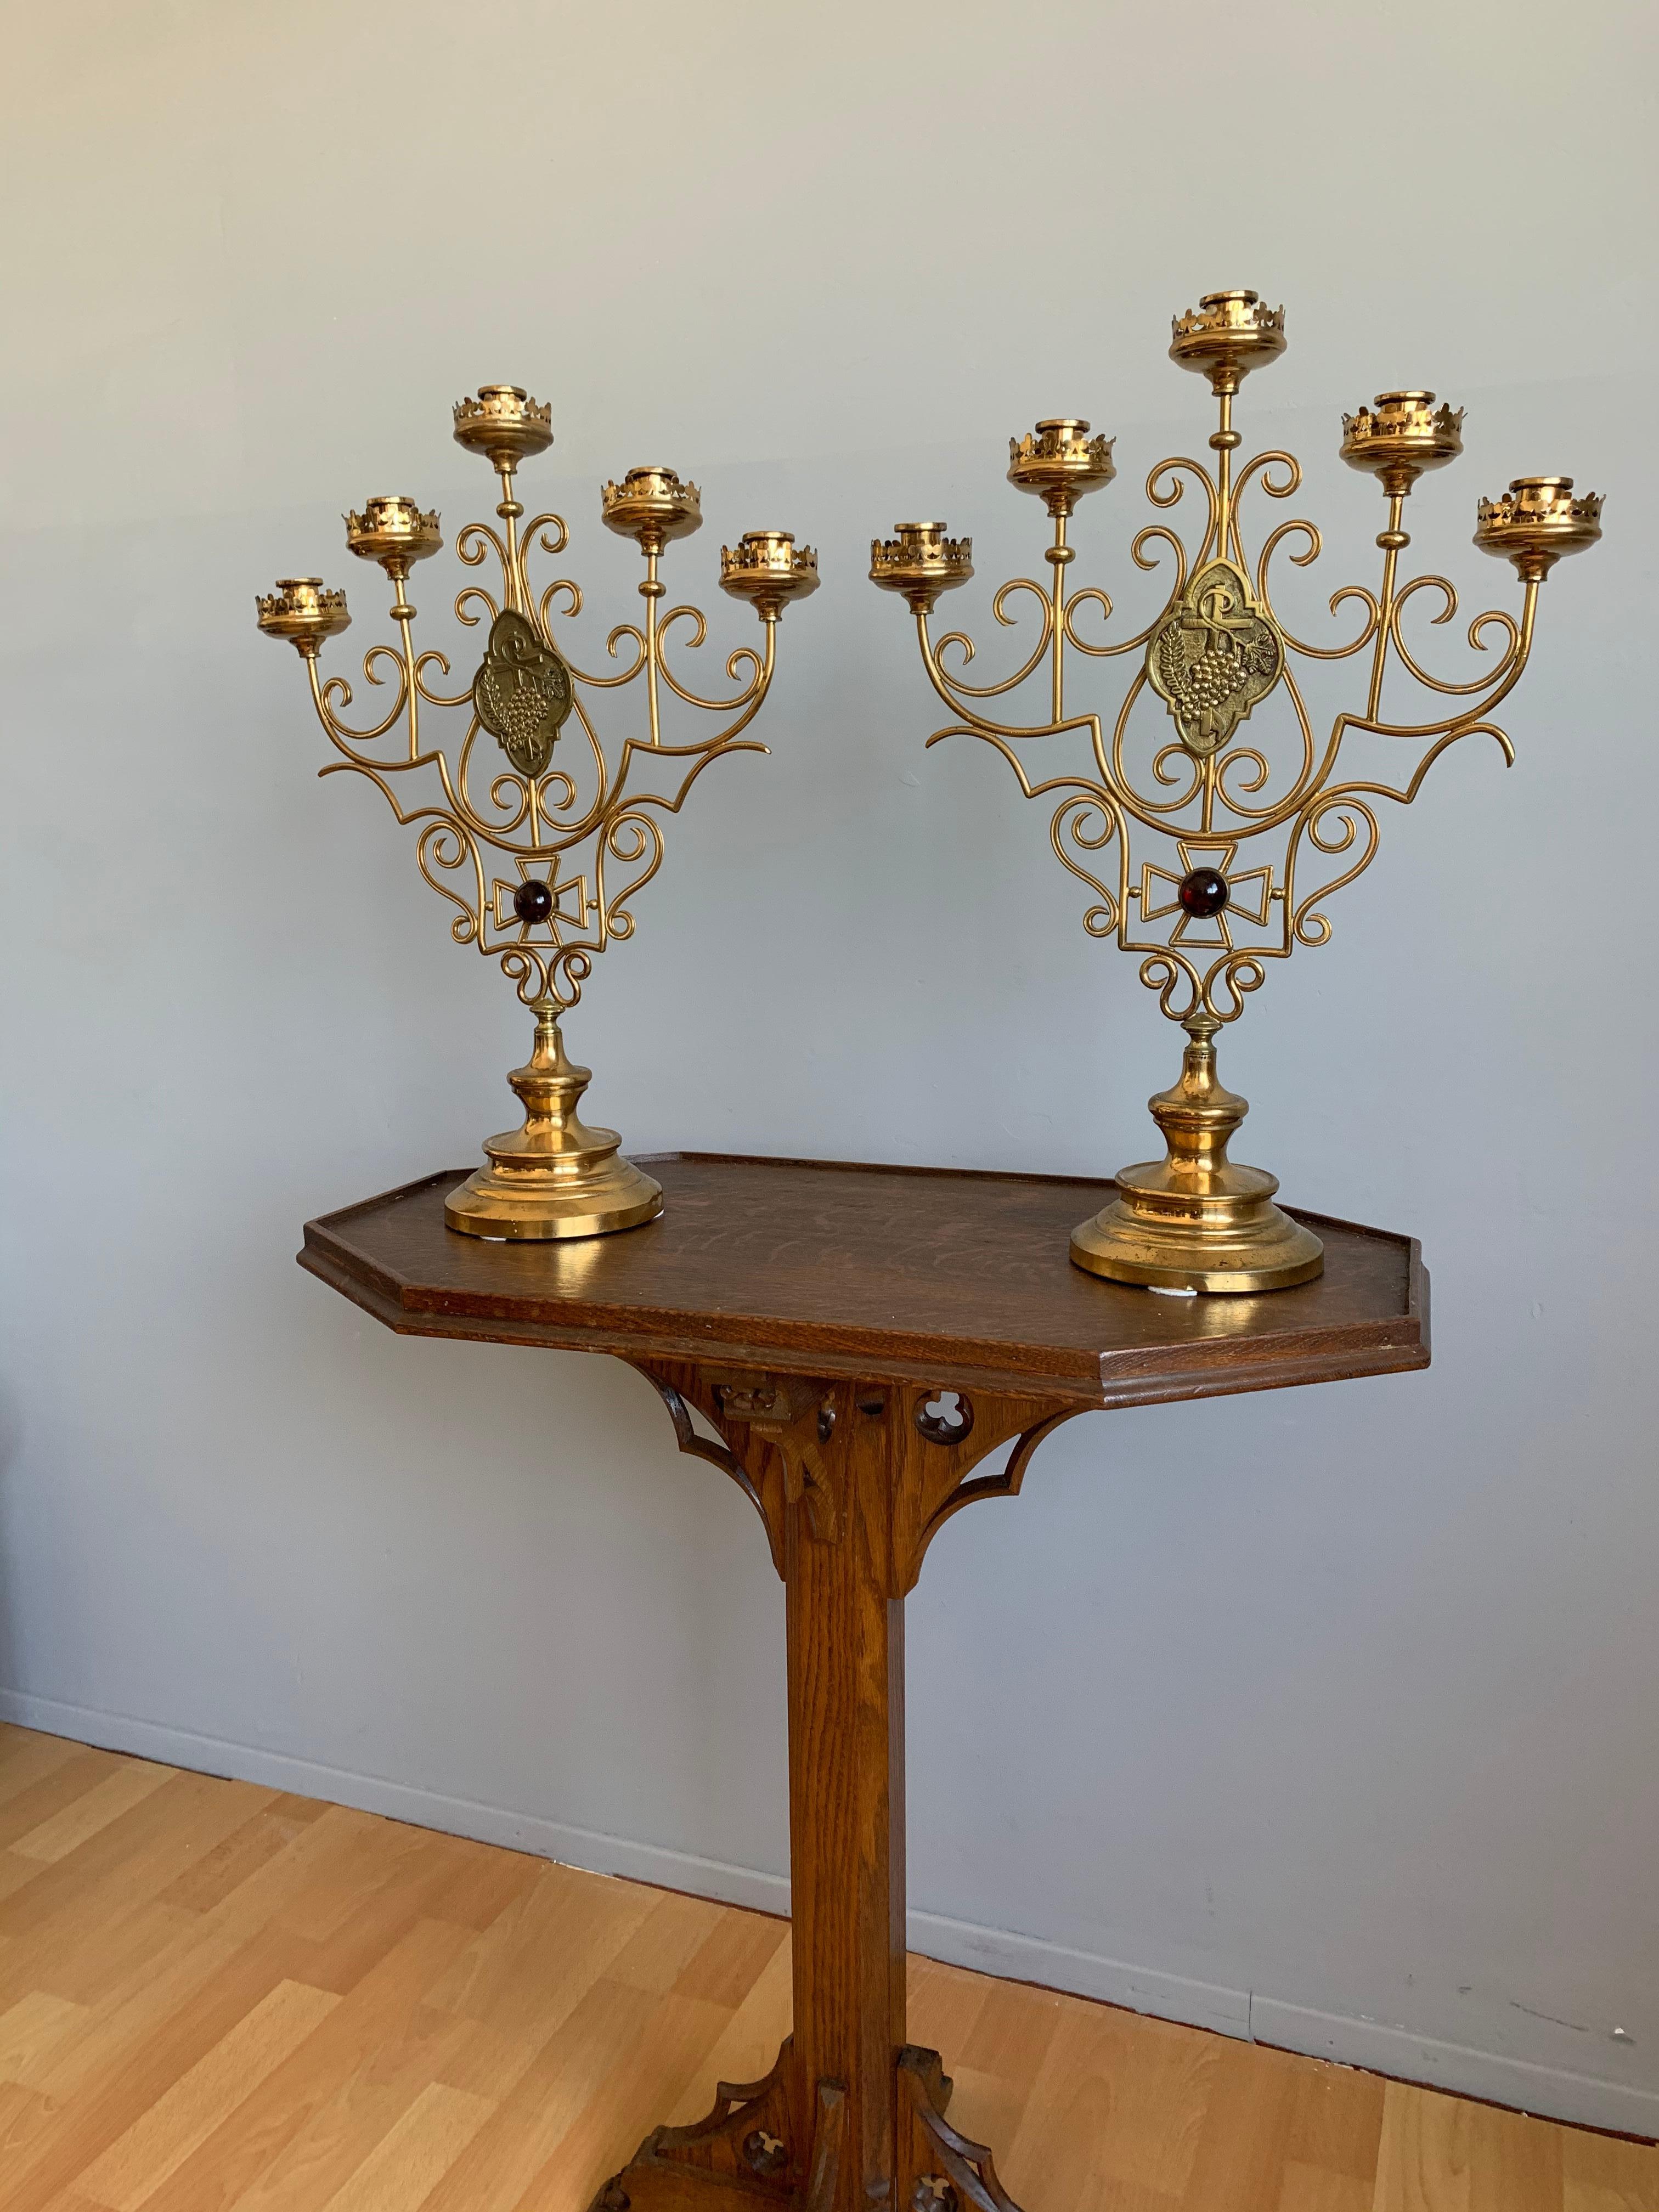 Scrolling Design and Excellent Condition, Large Pair of Gothic Art Candelabras For Sale 11